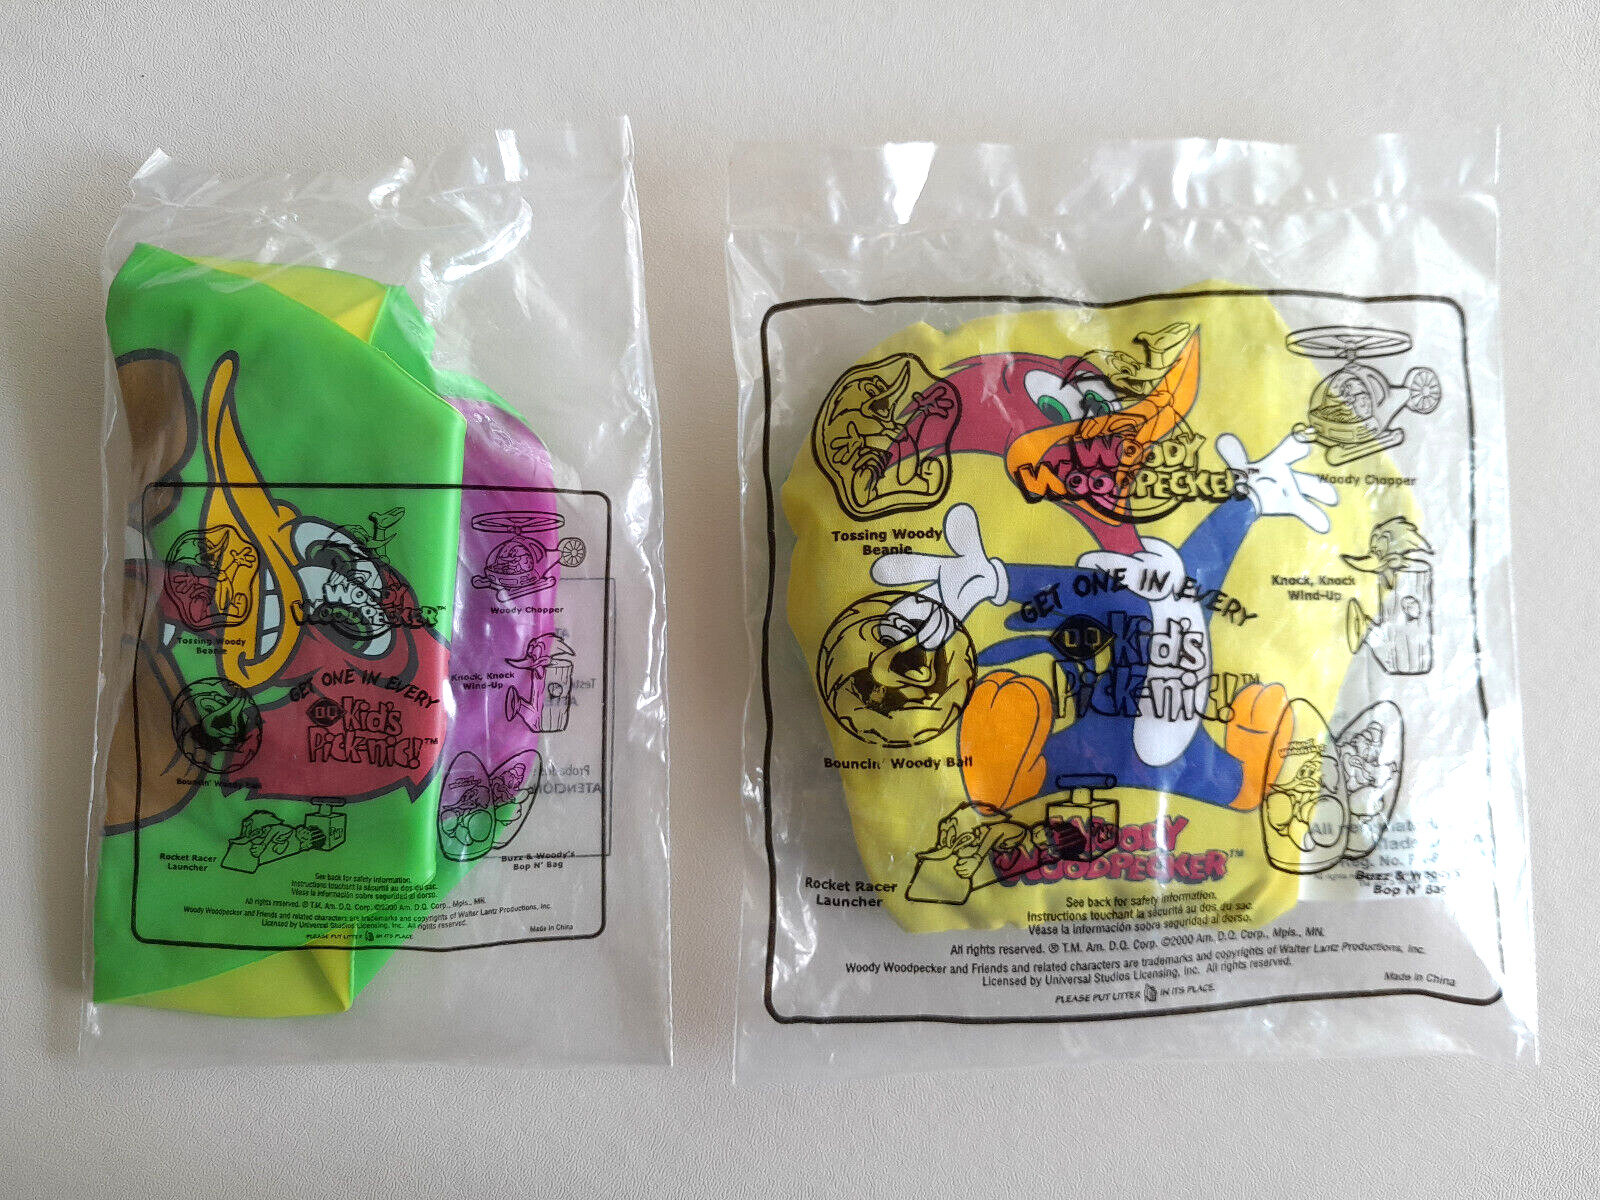 2000 DAIRY QUEEN DQ Kid’s Meal Toys WOODY WOODPECKER Set of 2